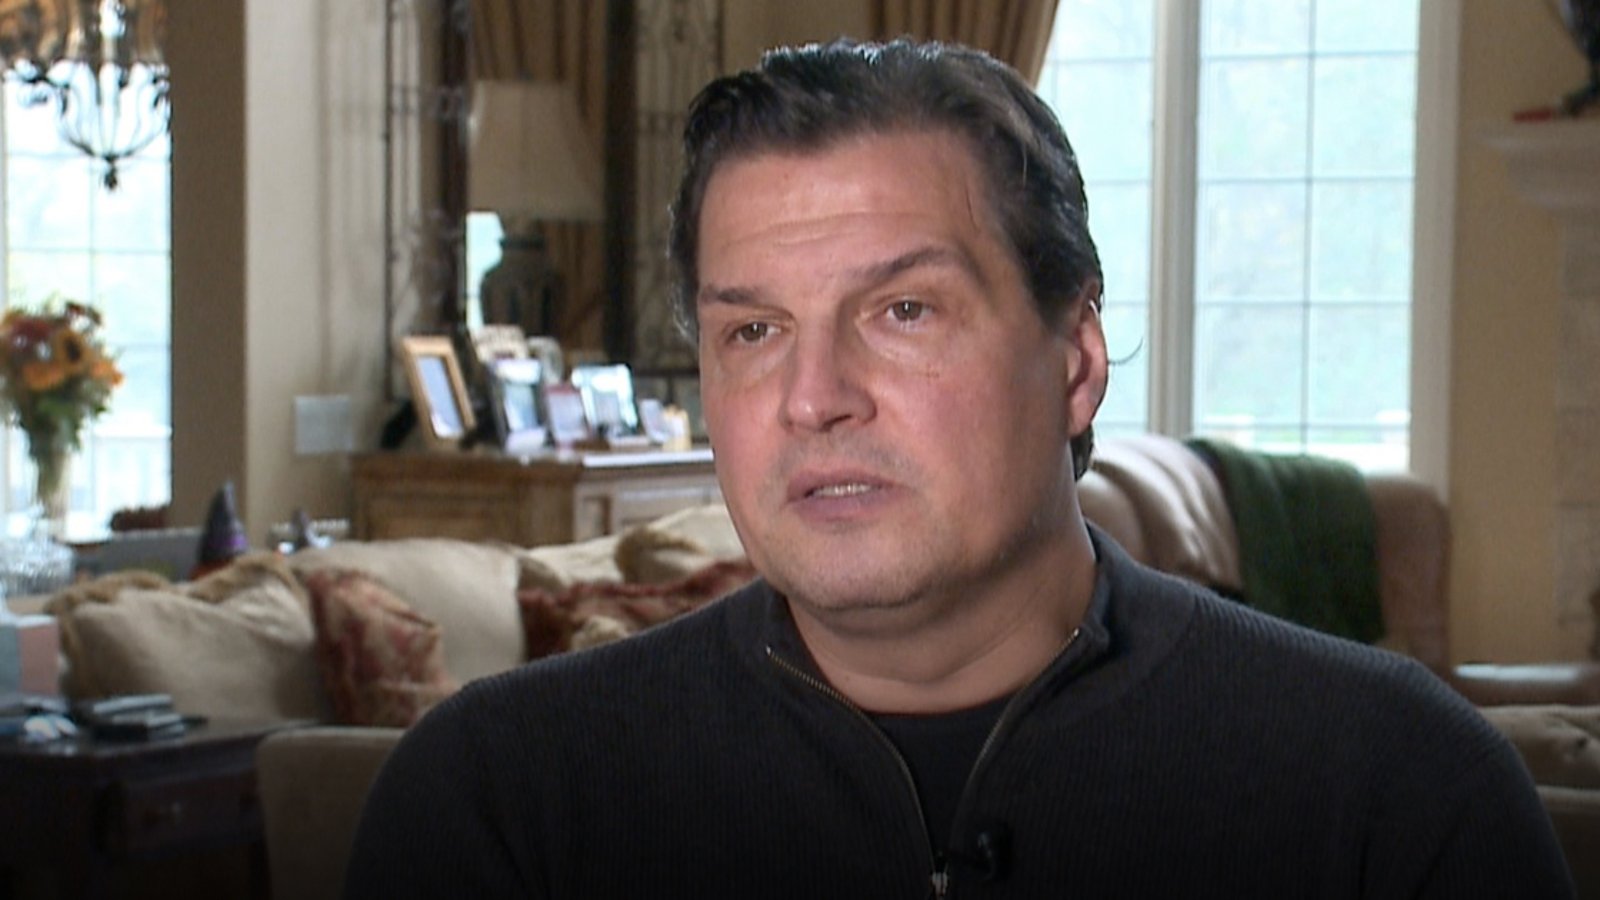 Report: Olczyk issues update on his cancer